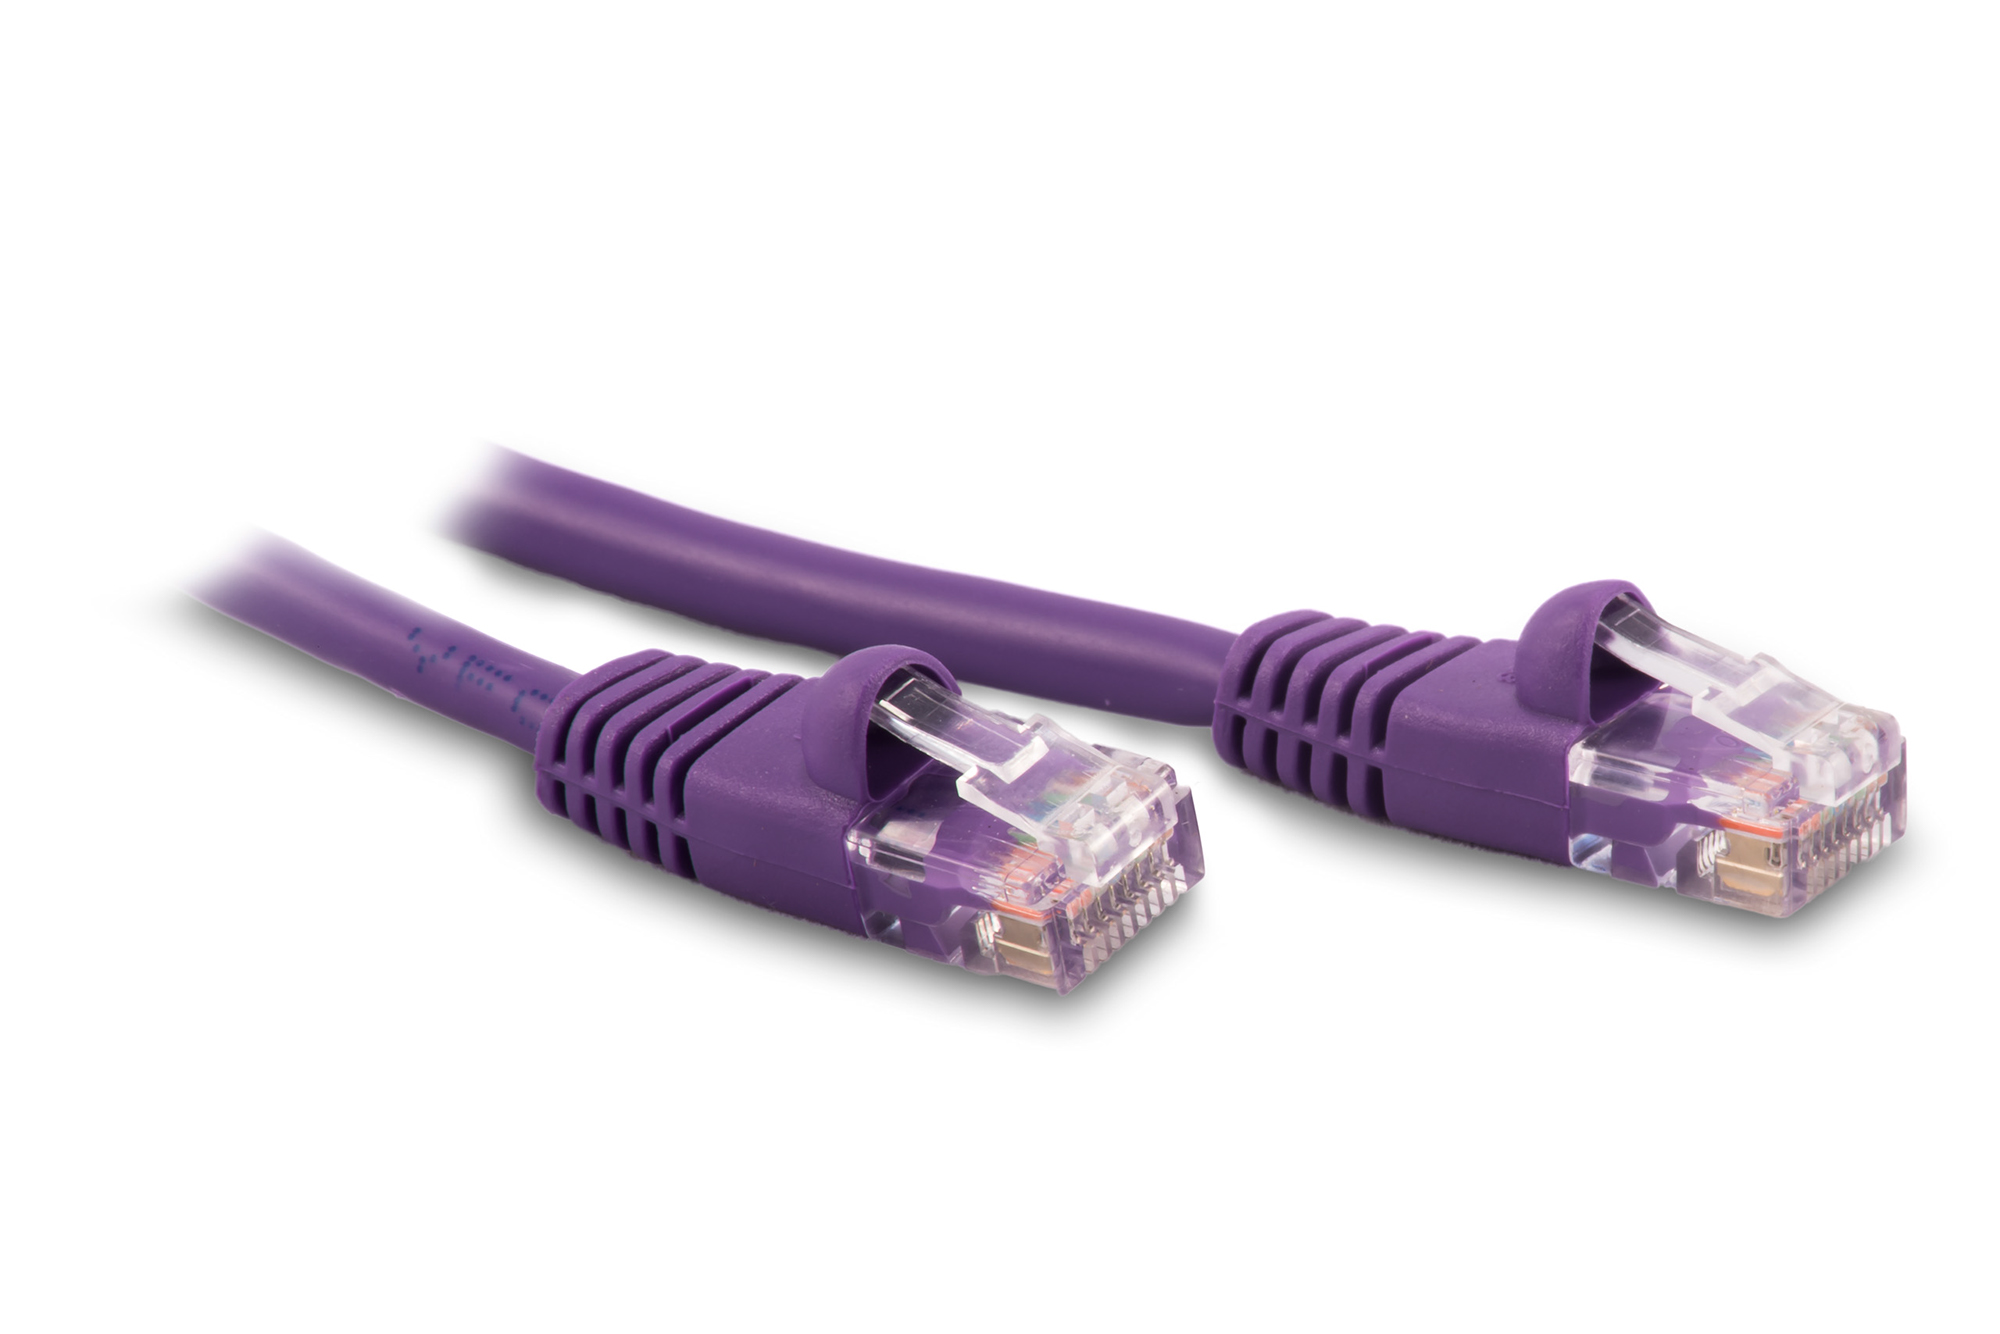 40ft Cat6 Ethernet Patch Cable - Violet Color - Snagless Boot